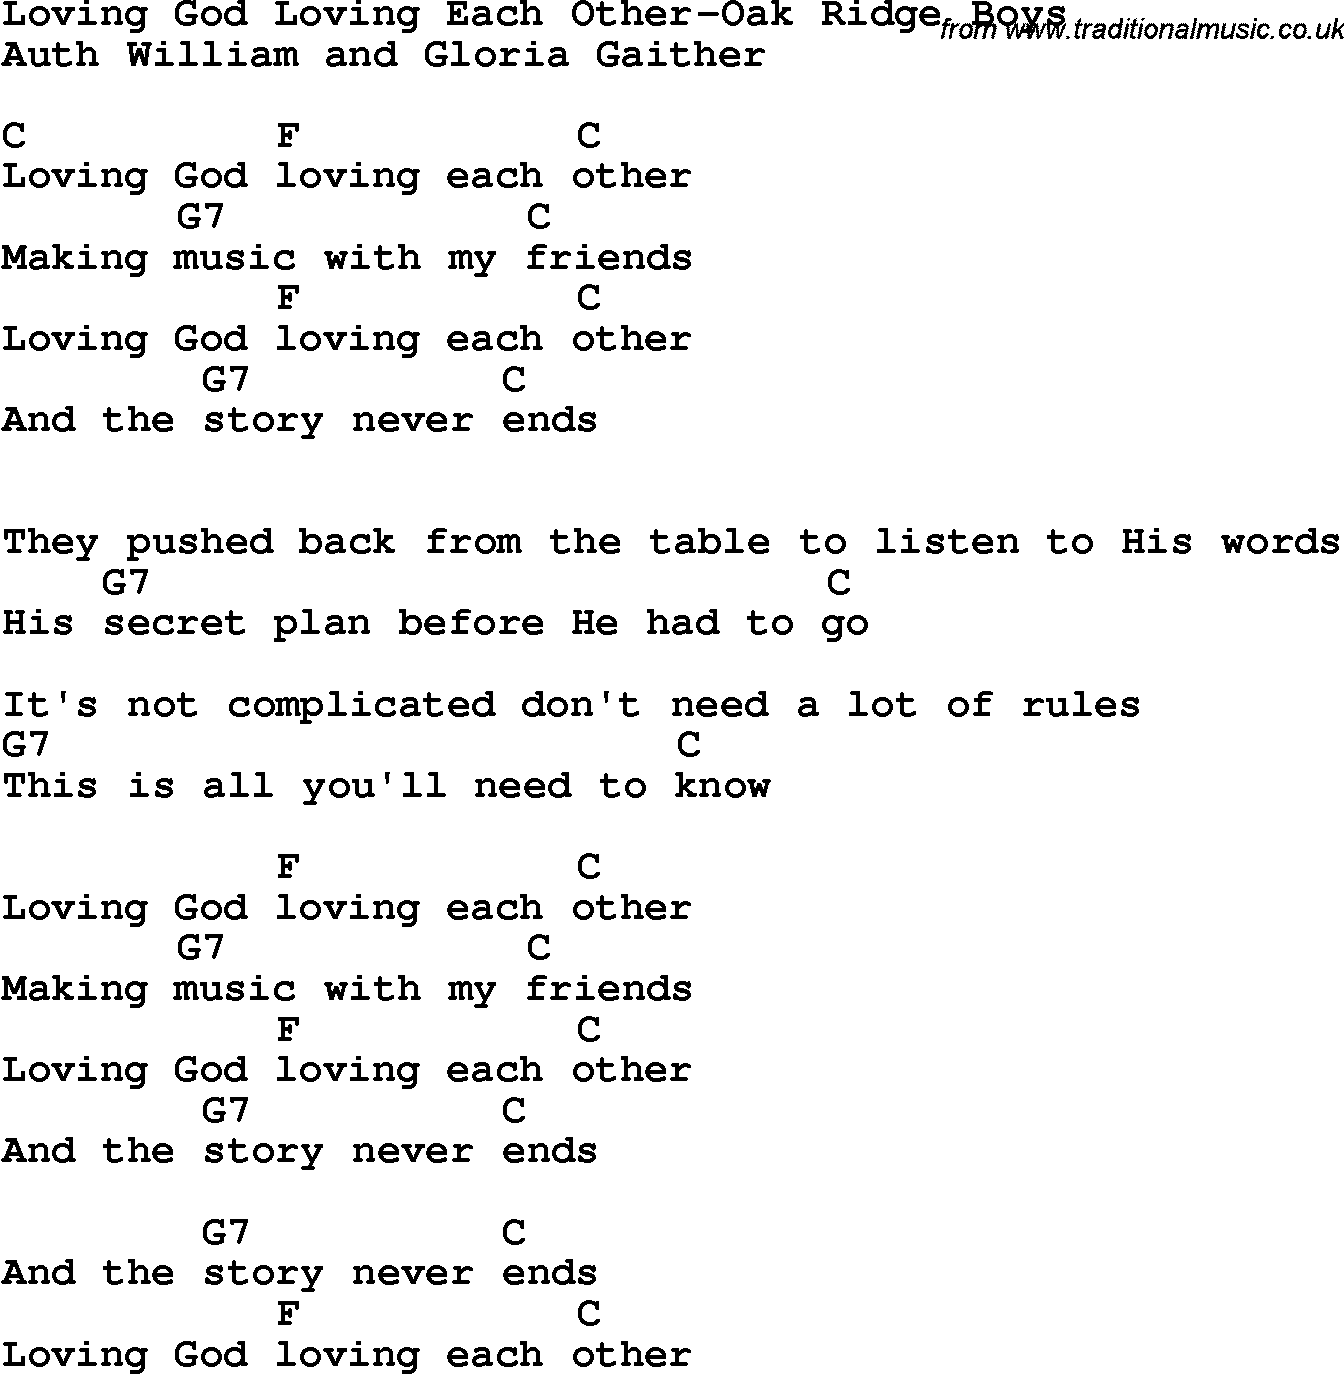 Country, Southern and Bluegrass Gospel Song Loving God Loving Each Other-Oak Ridge Boys lyrics and chords